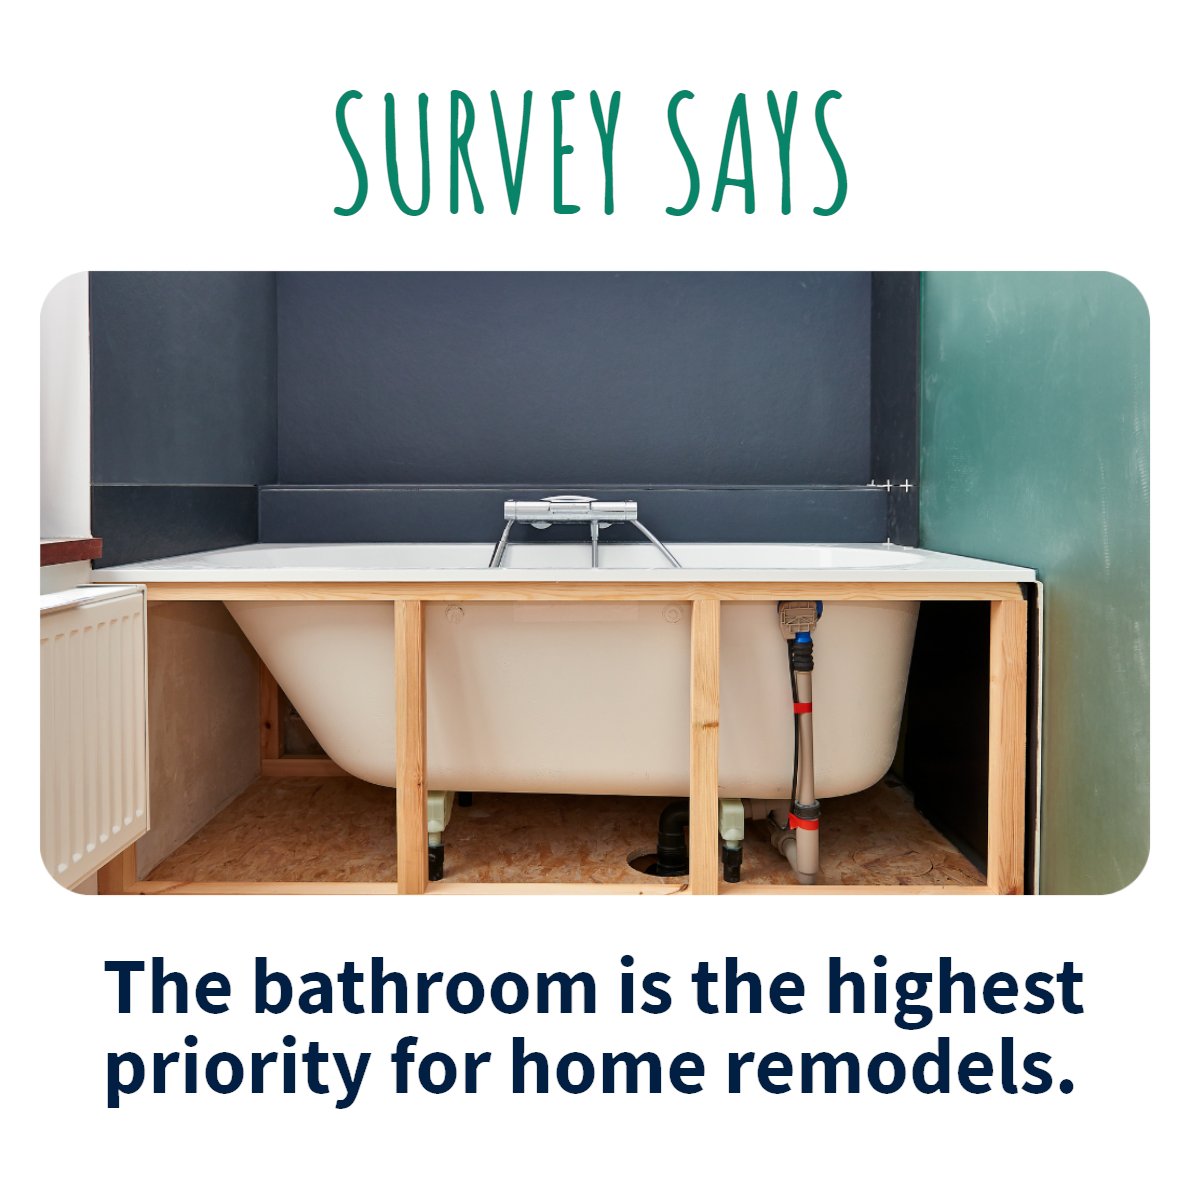 Done well, a bathroom remodel fulfills two important goals: 1. Your new bathroom is much more functional and simplifies your morning routine. 2. It looks amazing. 🛀

#remodel #diy #remodeling #diyhomedecor #bathremodel #bathroom